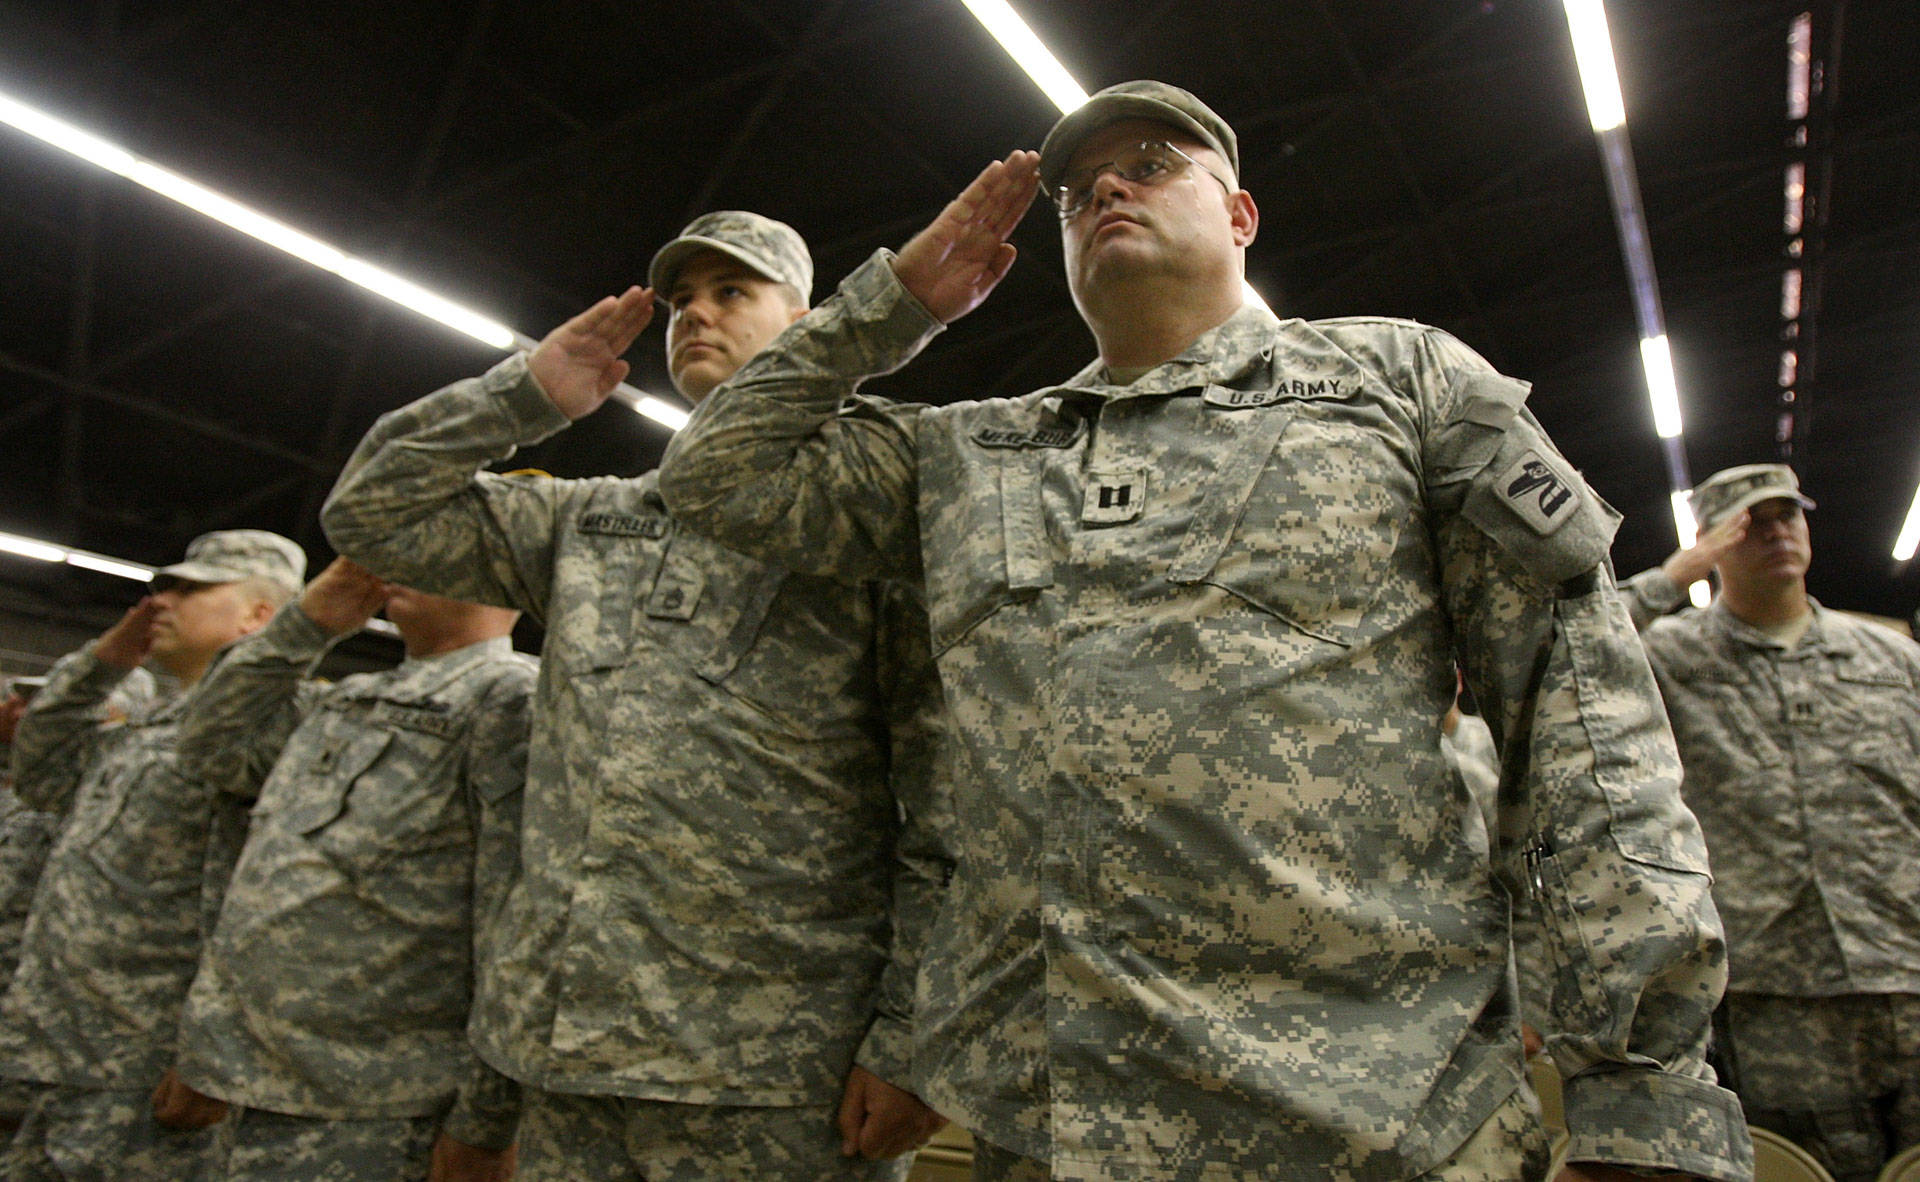 Soldiers attend a farewell ceremony for about 850 California National Guardsmen from the 1st Battalion on Aug. 22, 2008, in San Bernardino. The soldiers were on their way to a yearlong deployment to Iraq. David McNew/Getty Images